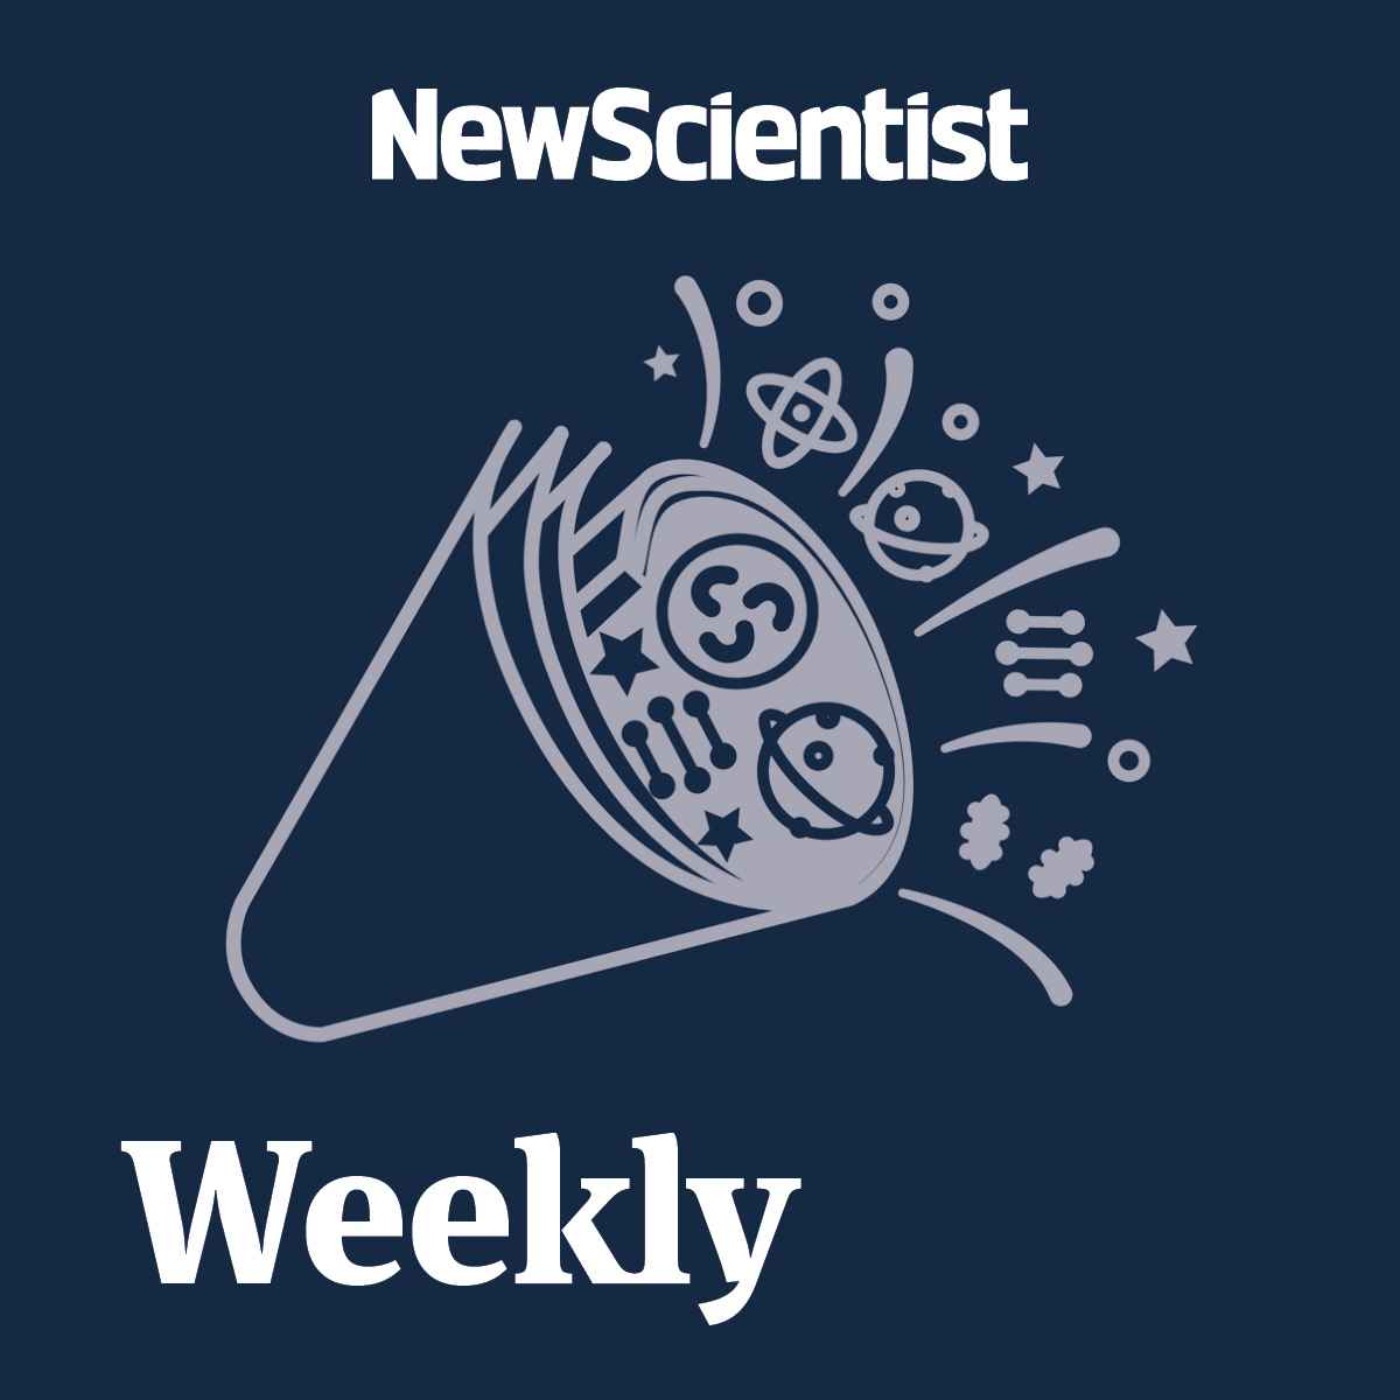 Weekly: Miniature livers made from lymph nodes in groundbreaking medical procedure